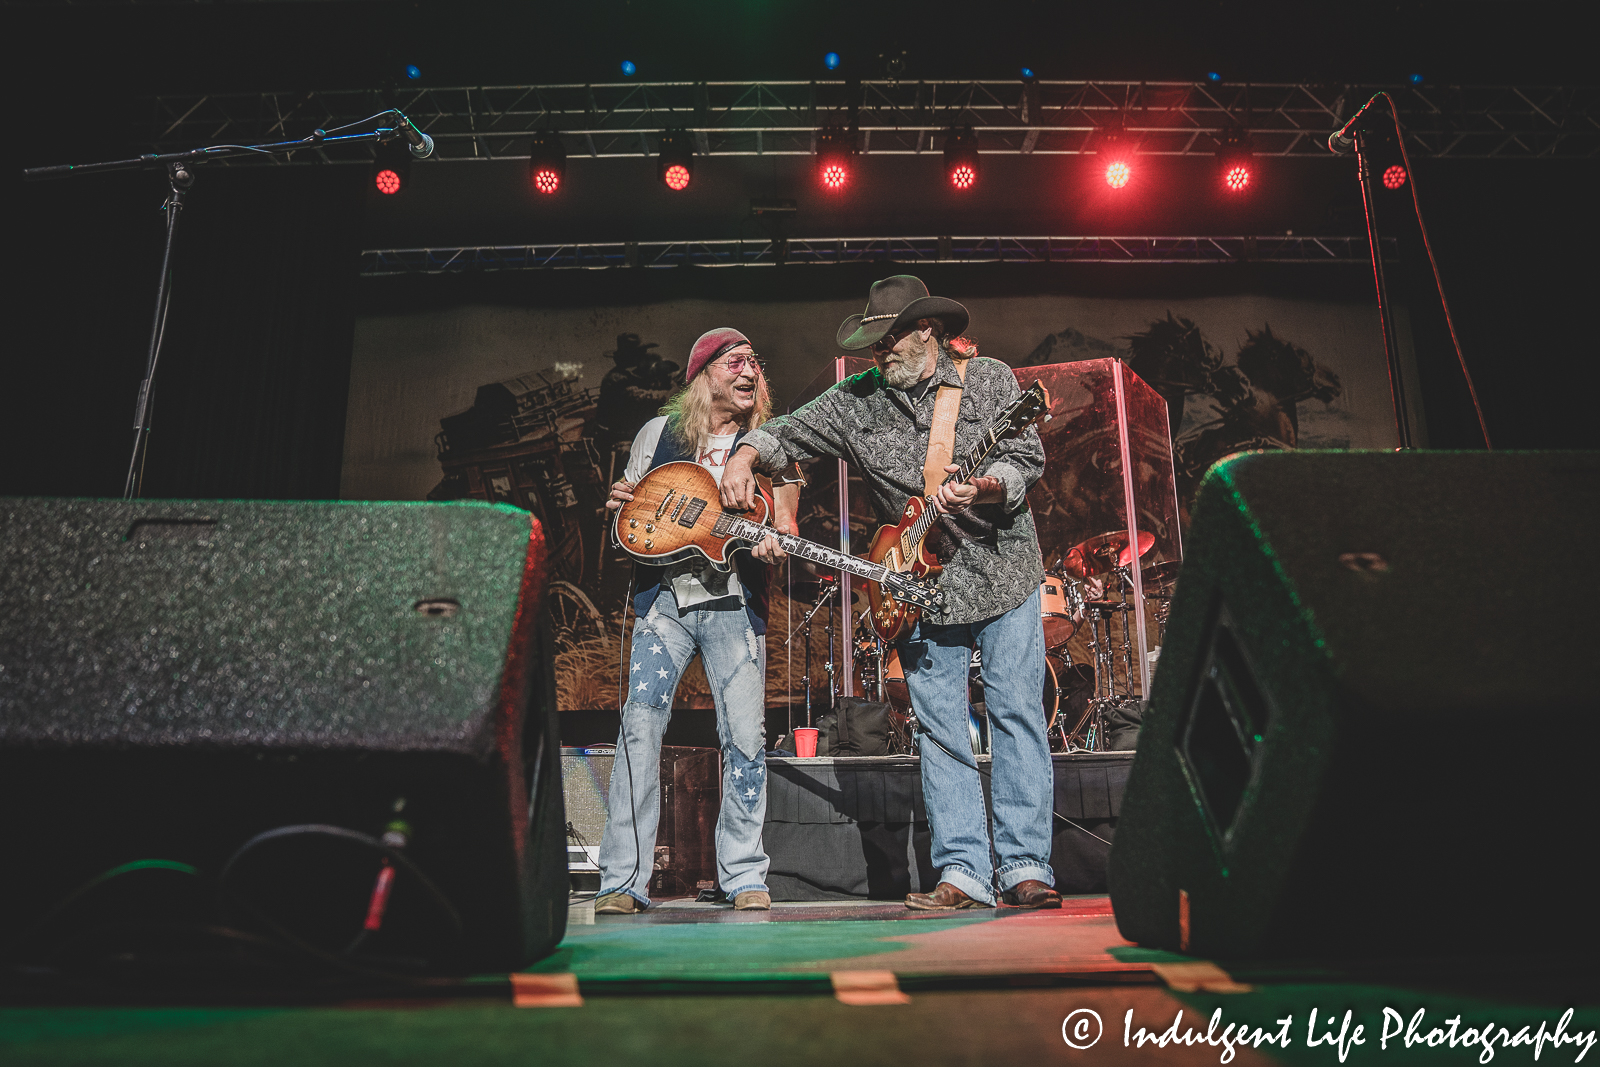 The Marshall Tucker Band guitarists Chris Hicks and Rick Willis performing together at Star Pavilion inside of Ameristar Casino in Kansas City, MO on October 28, 2022.